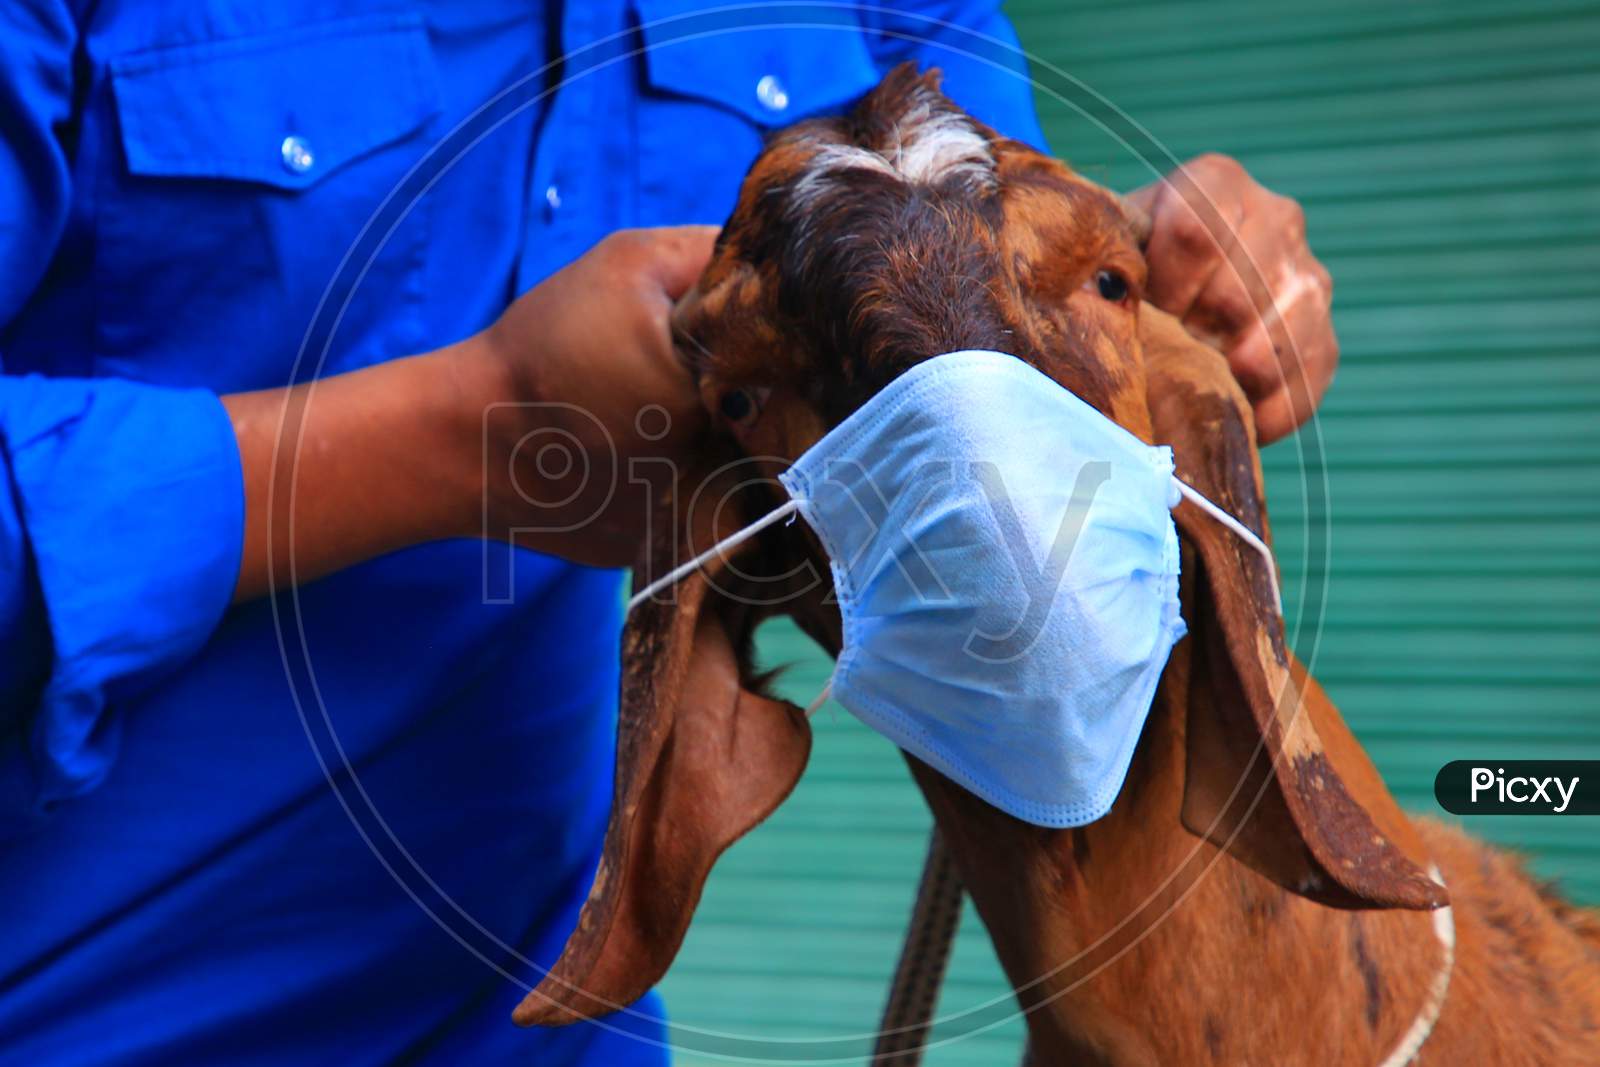 A Man Holds A Face Mask Against The Face Of A Goat During  Eid Al-Adha, The Feast Of Sacrifice Outside The Shrine Of Sufi Saint Khwaja Moinuddin Chishti In Ajmer, On August 1, 2020.